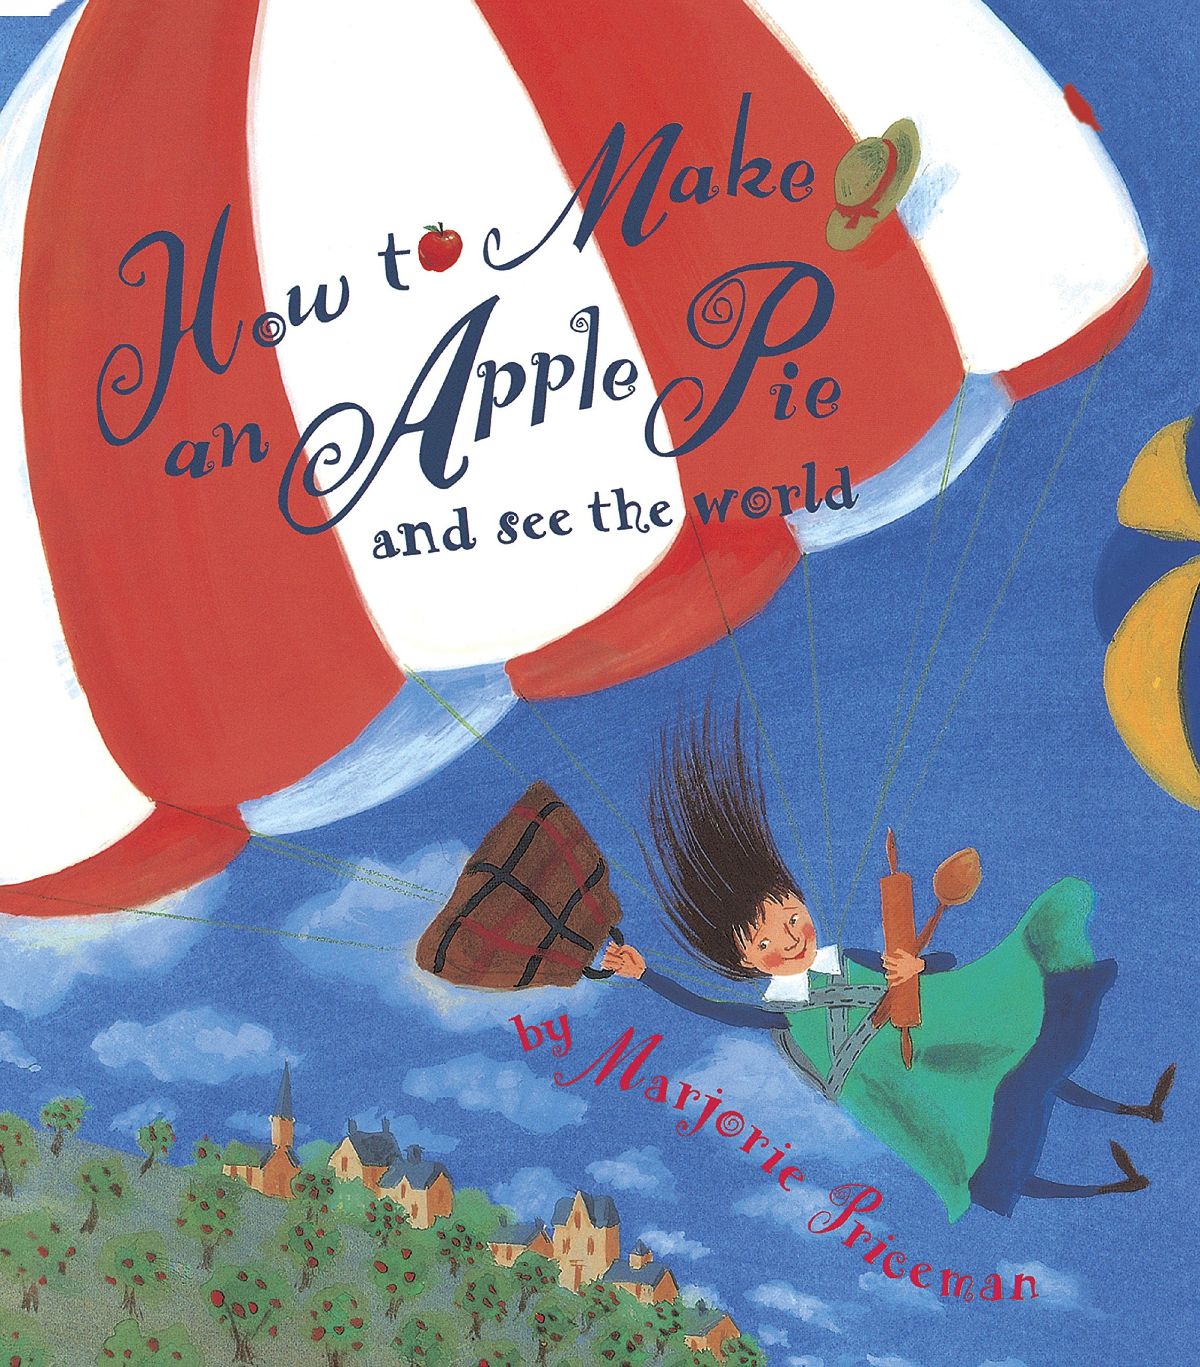 How to Make an Apple Pie and See the World book cover.